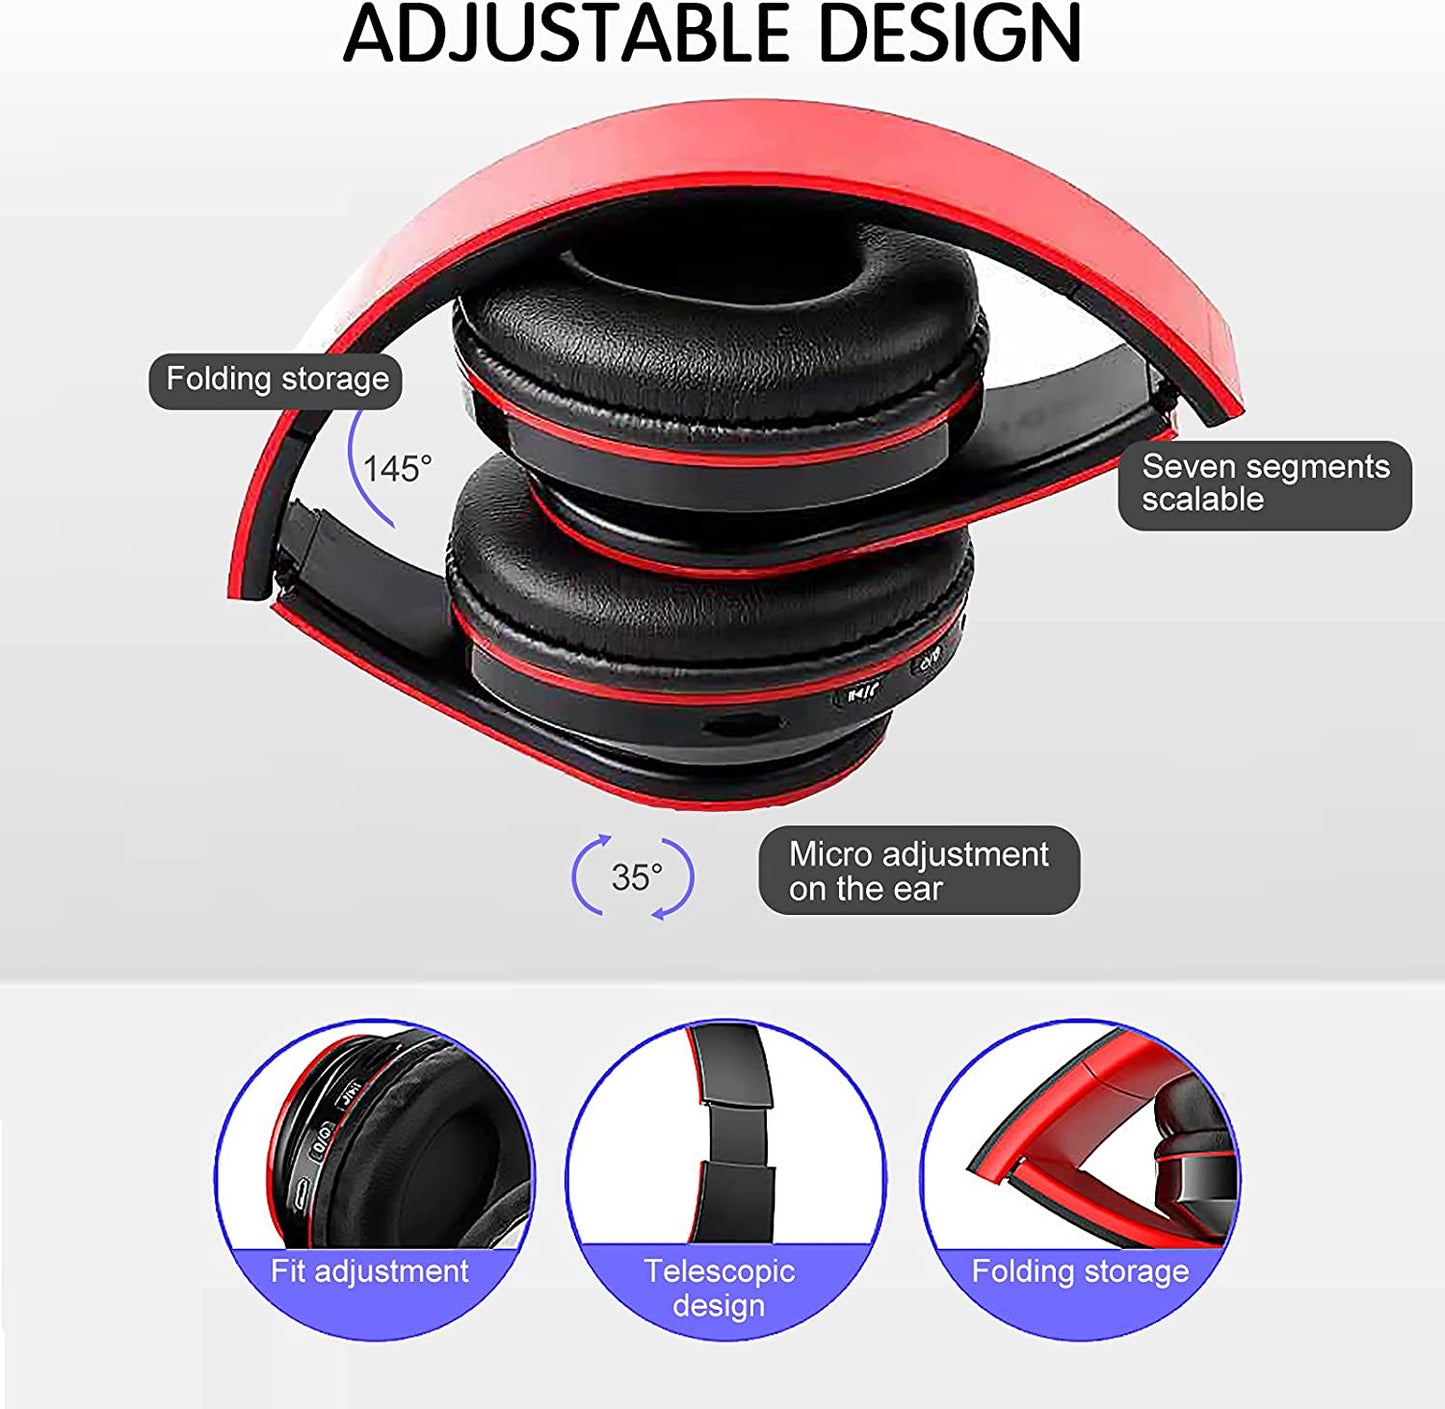 Over Ear Bluetooth Headphones, Foldable LED Stereo Headphones with Built-In Microphone, Noise-Cancelling Wireless Headset for Pc, Smart Phone, TV